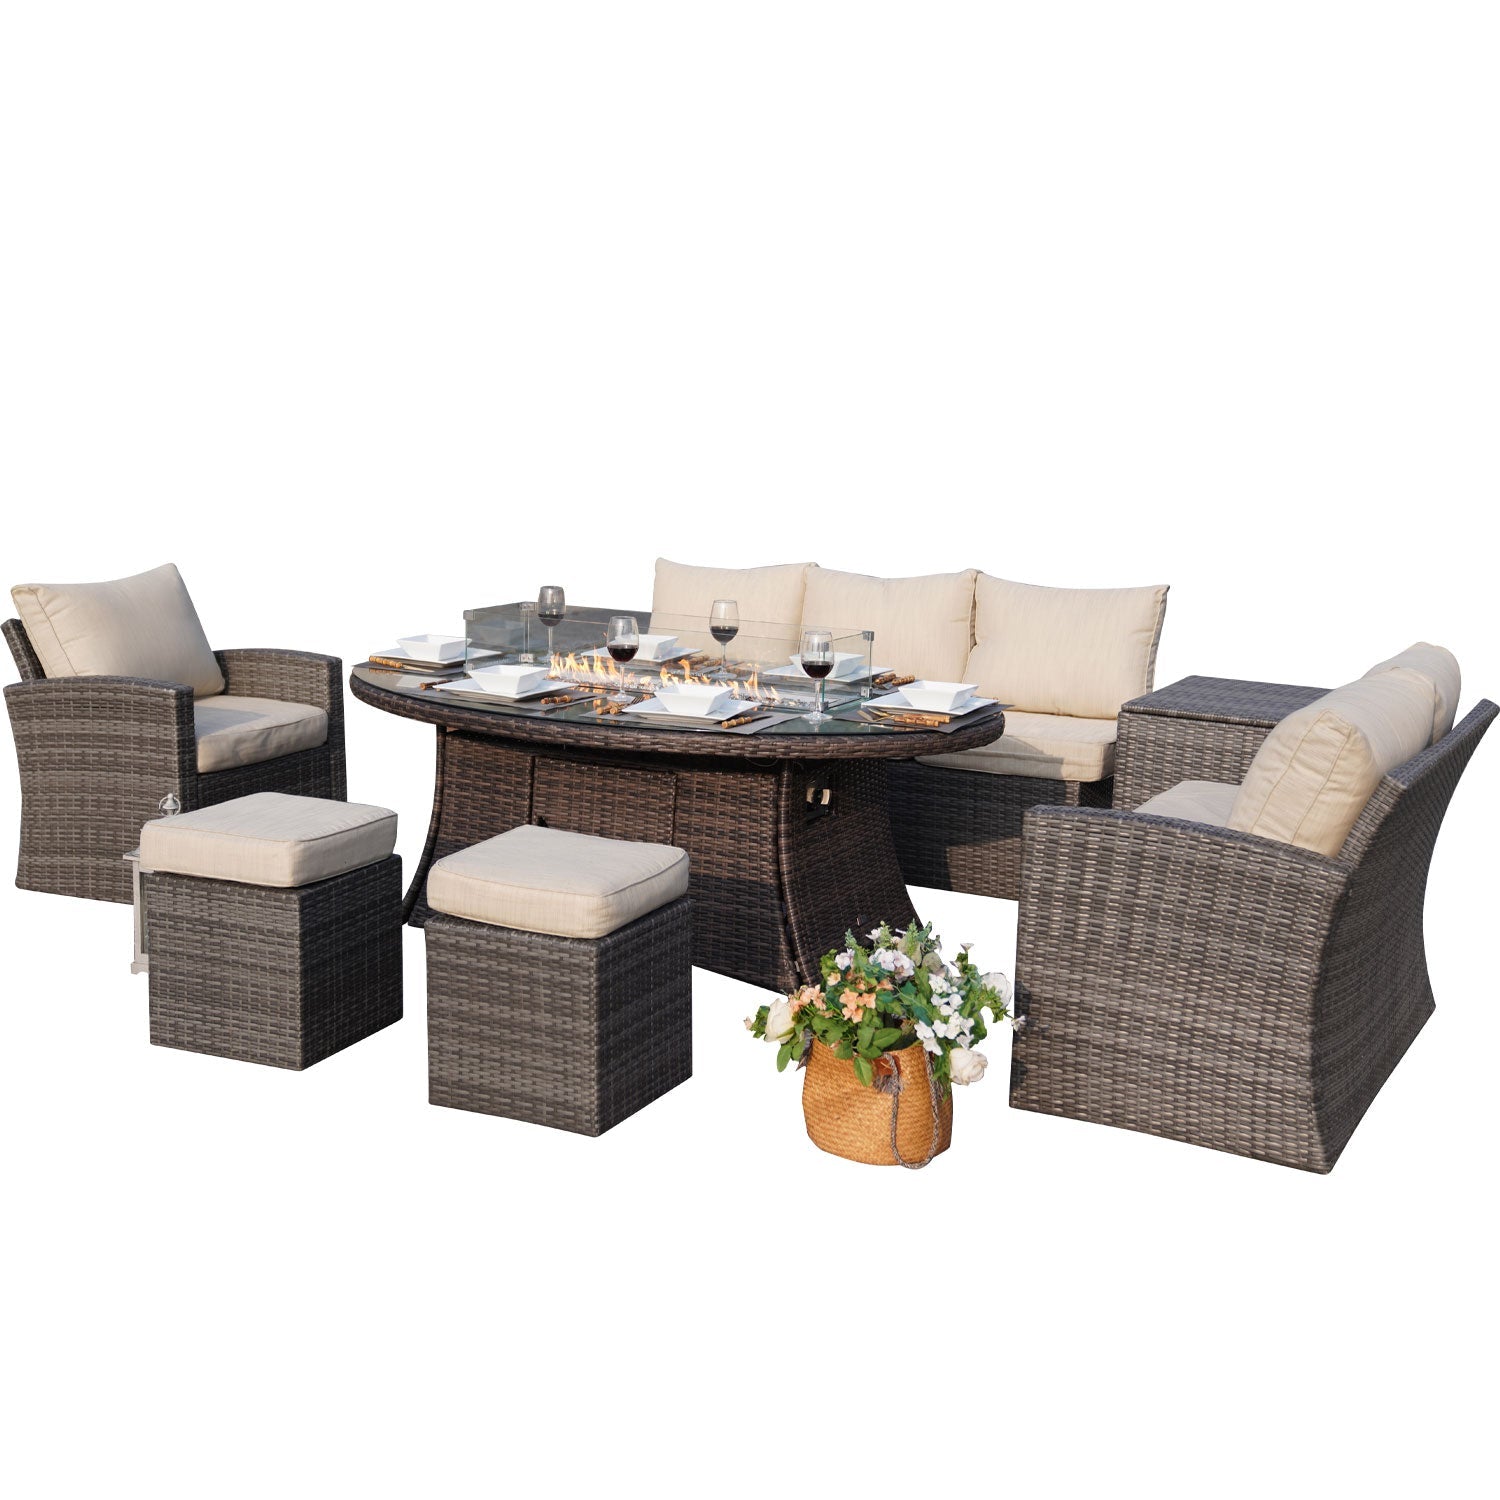 7-Piece Patio Conversational Sofa Set with Oval Firepit Dining Table and 2 Ottomans